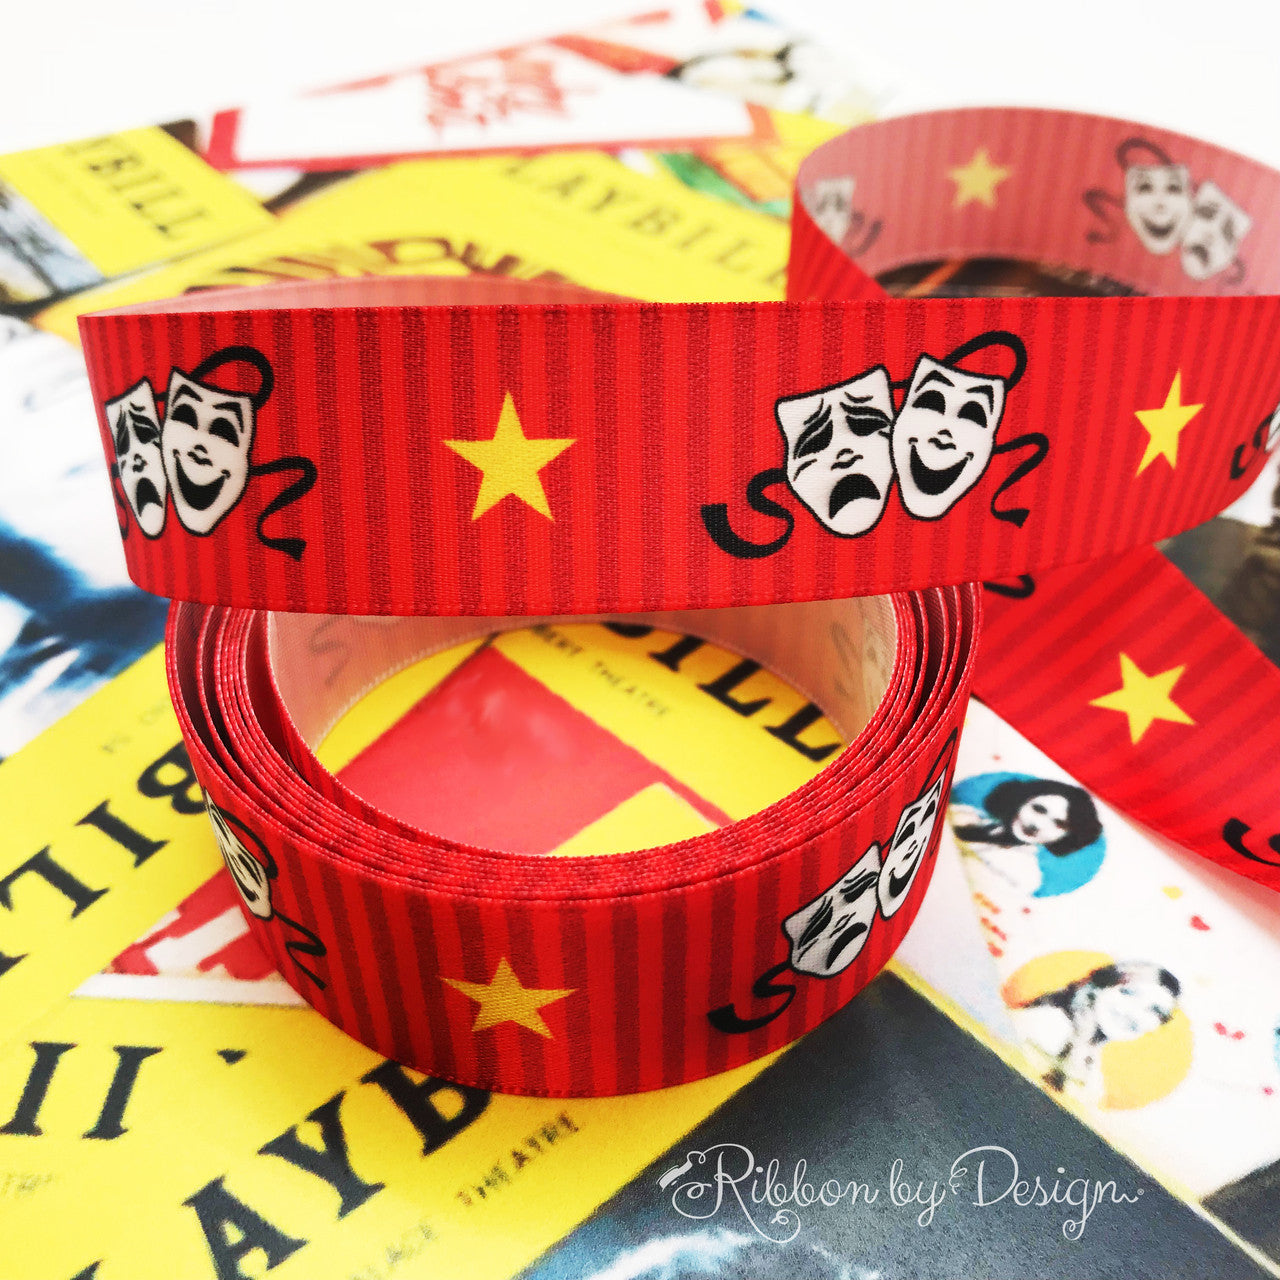 Our theater themed ribbon with the masks of comedy and tragedy on 7/8" white single face satin will make the gifts at any cast party truly pop!